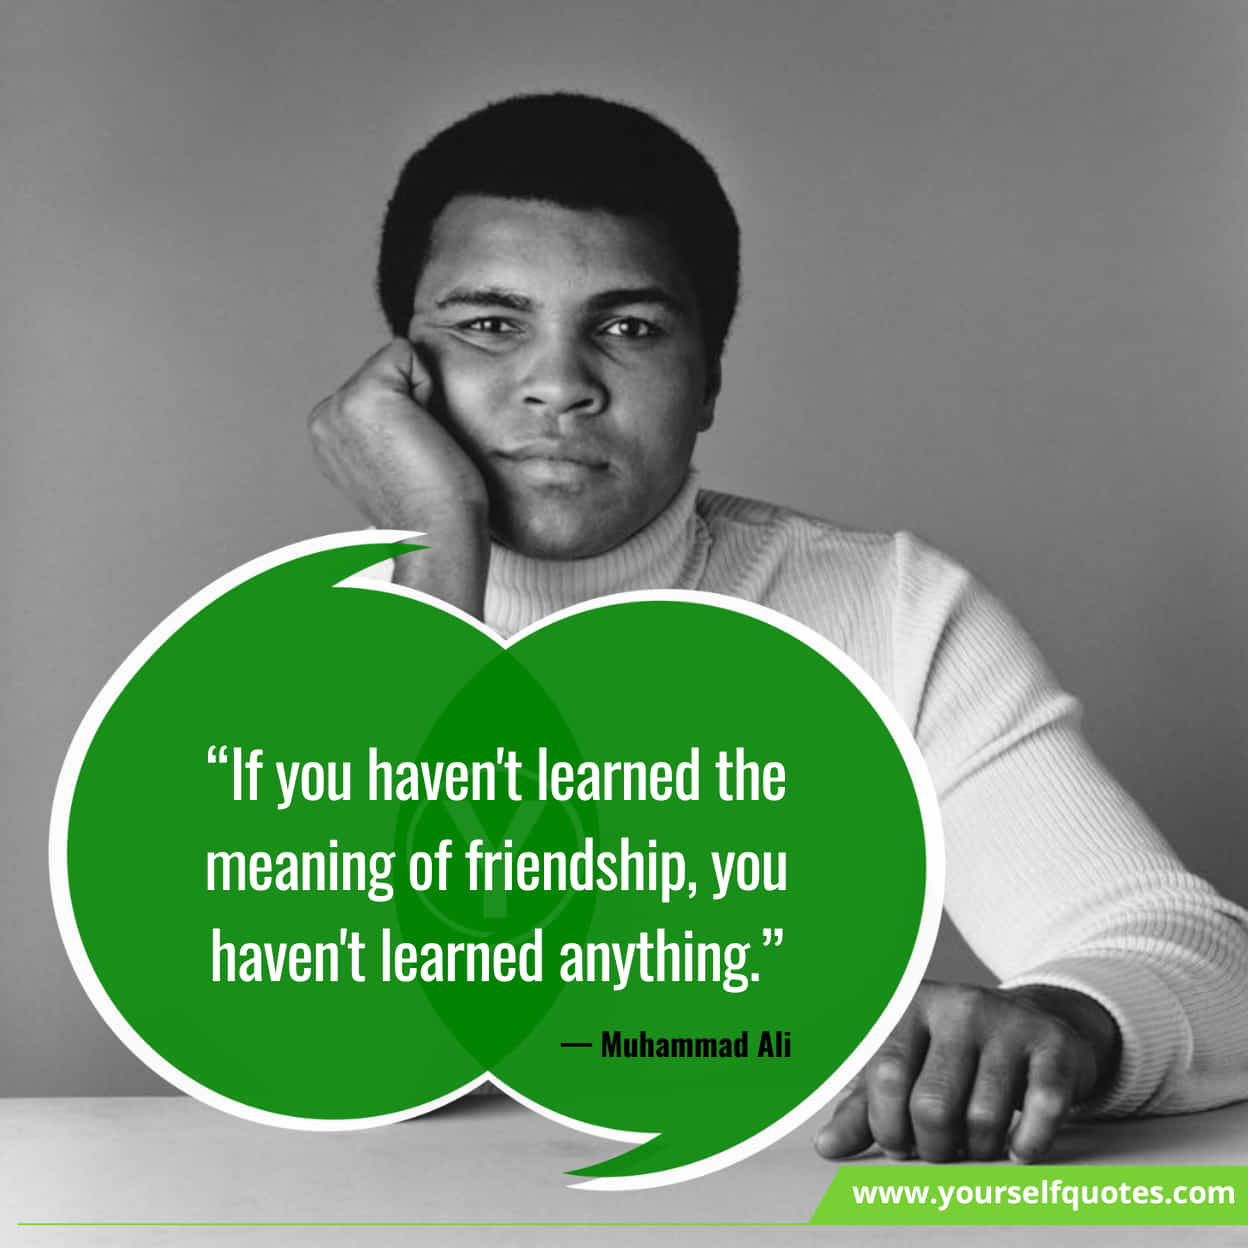 Best Muhammad Ali Quotes About Life